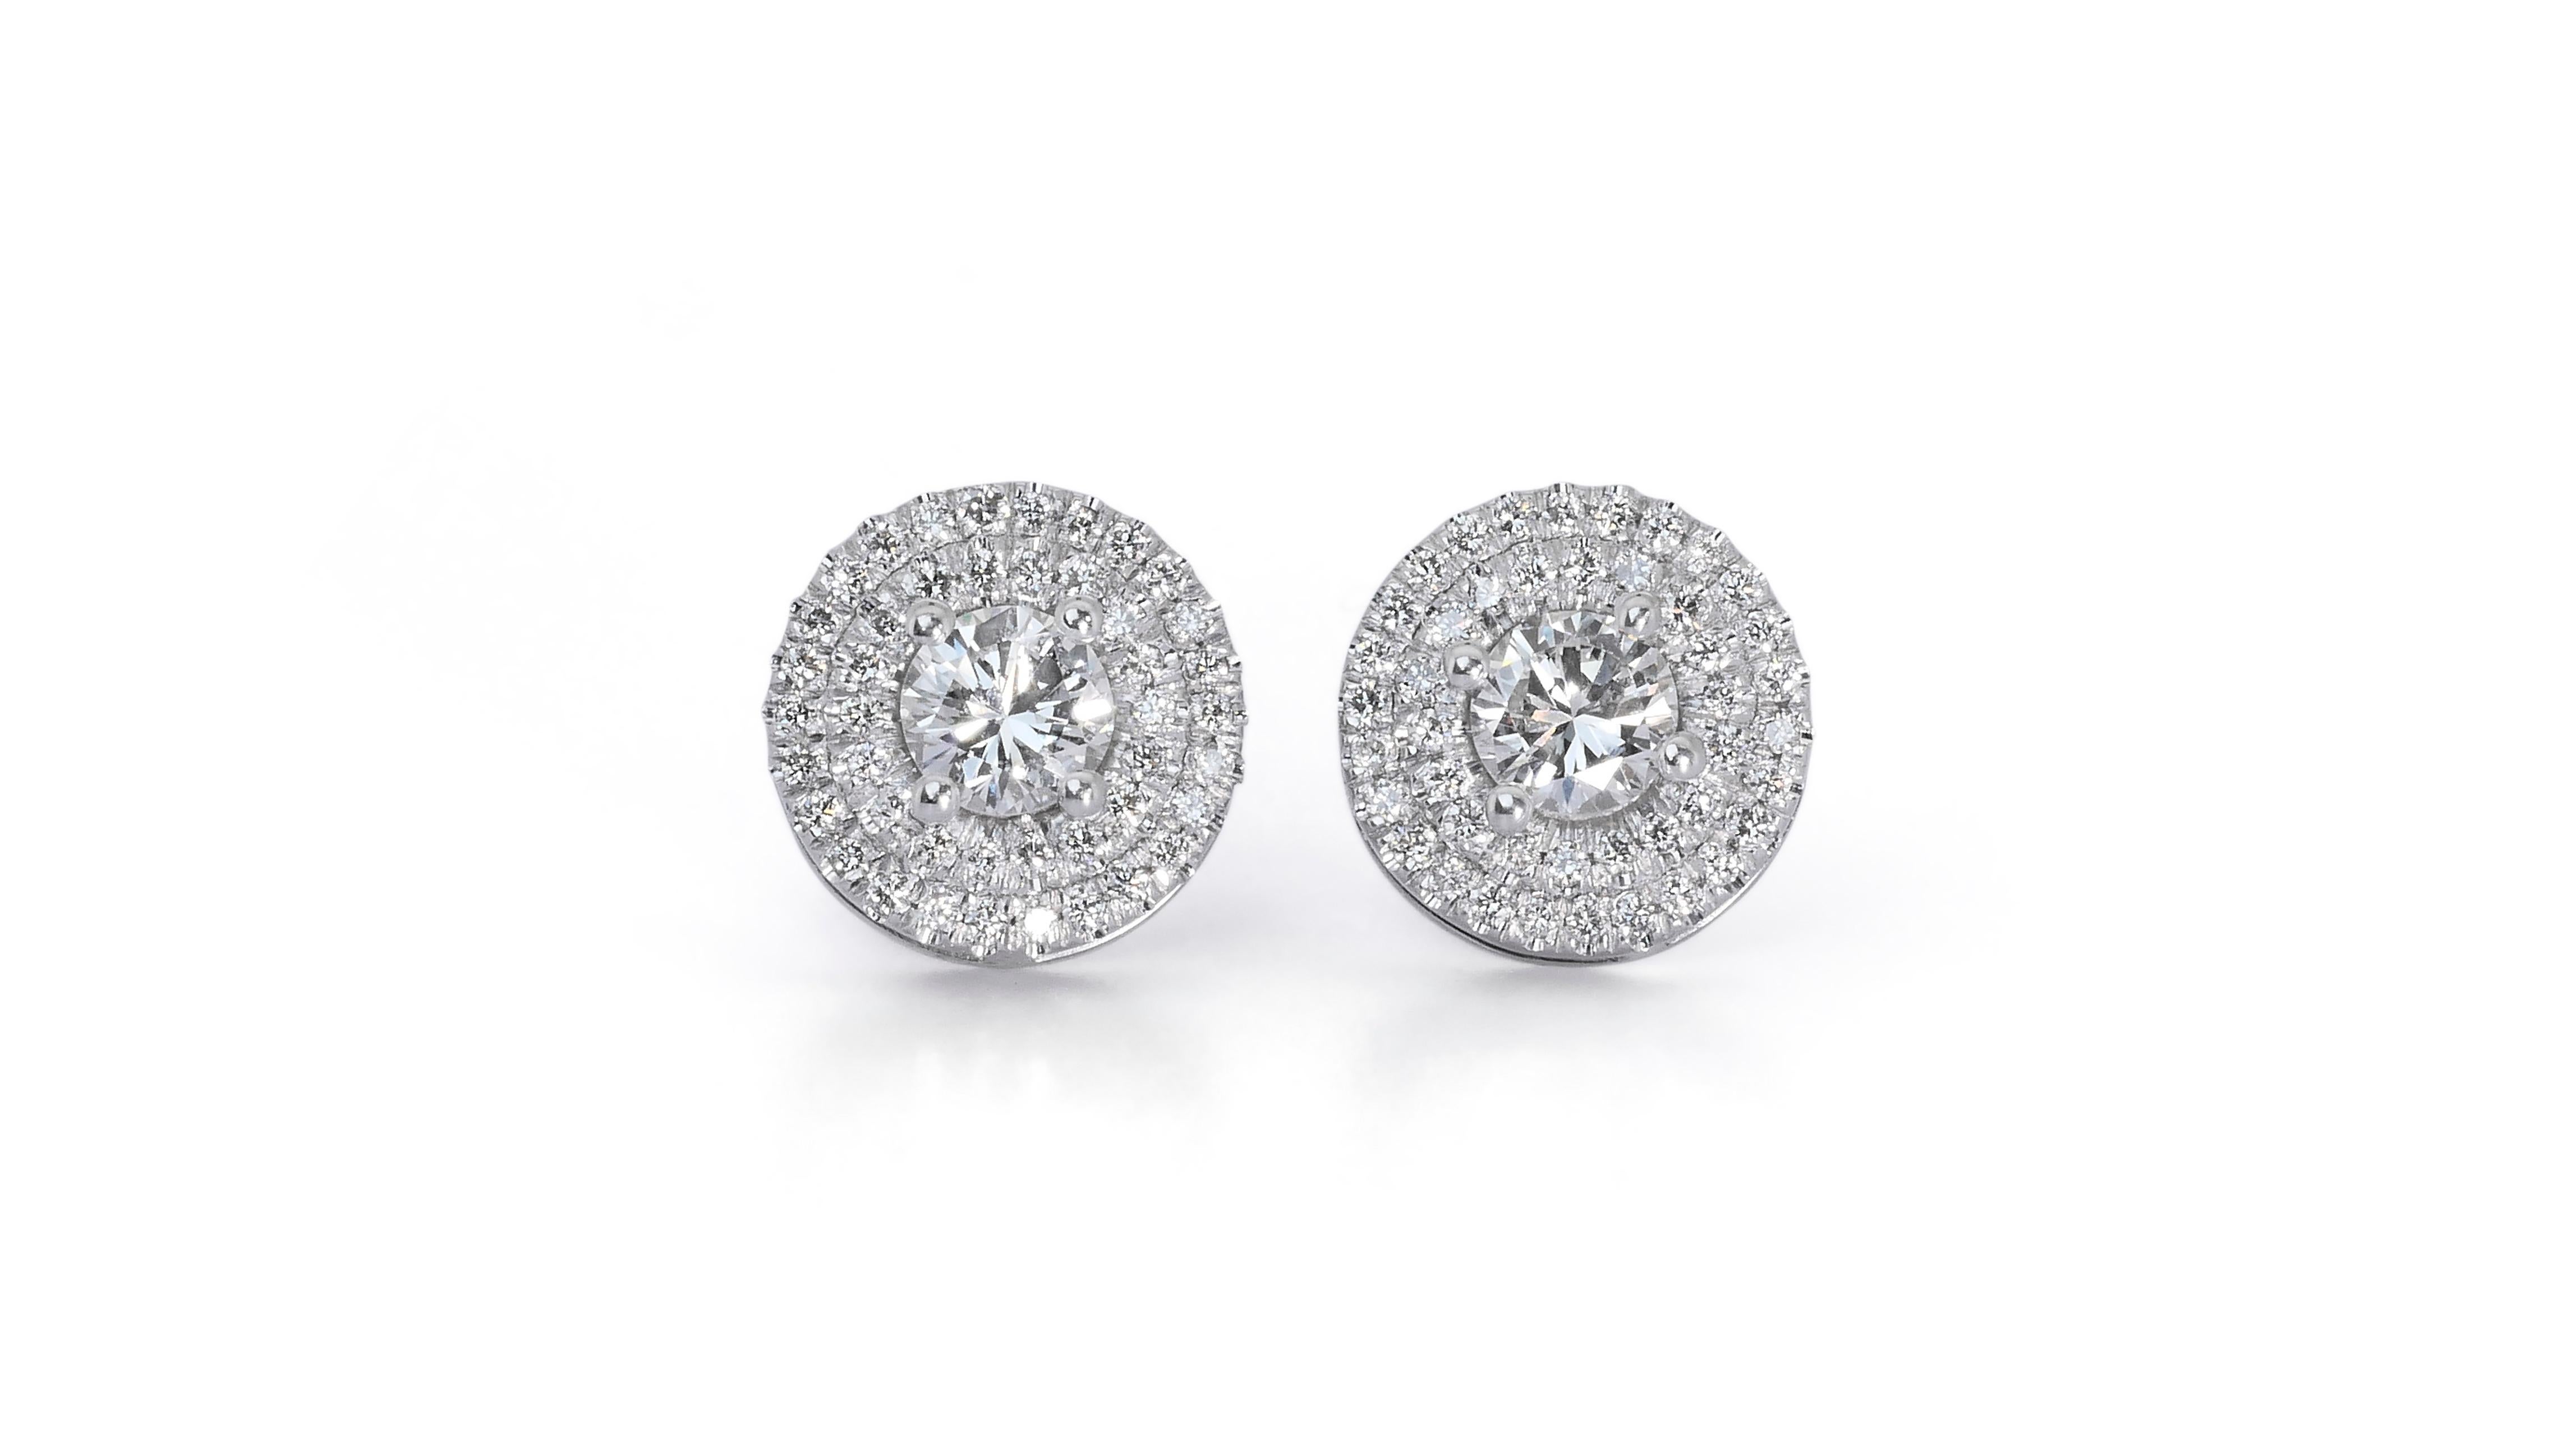 Radiant 1.20ct Diamonds Halo Stud Earrings in 18k White Gold - GIA Certified

These exquisite halo diamond earrings, crafted in fine 18k white gold, epitomize sophistication and timeless style. Each earring features a central round diamond weighing